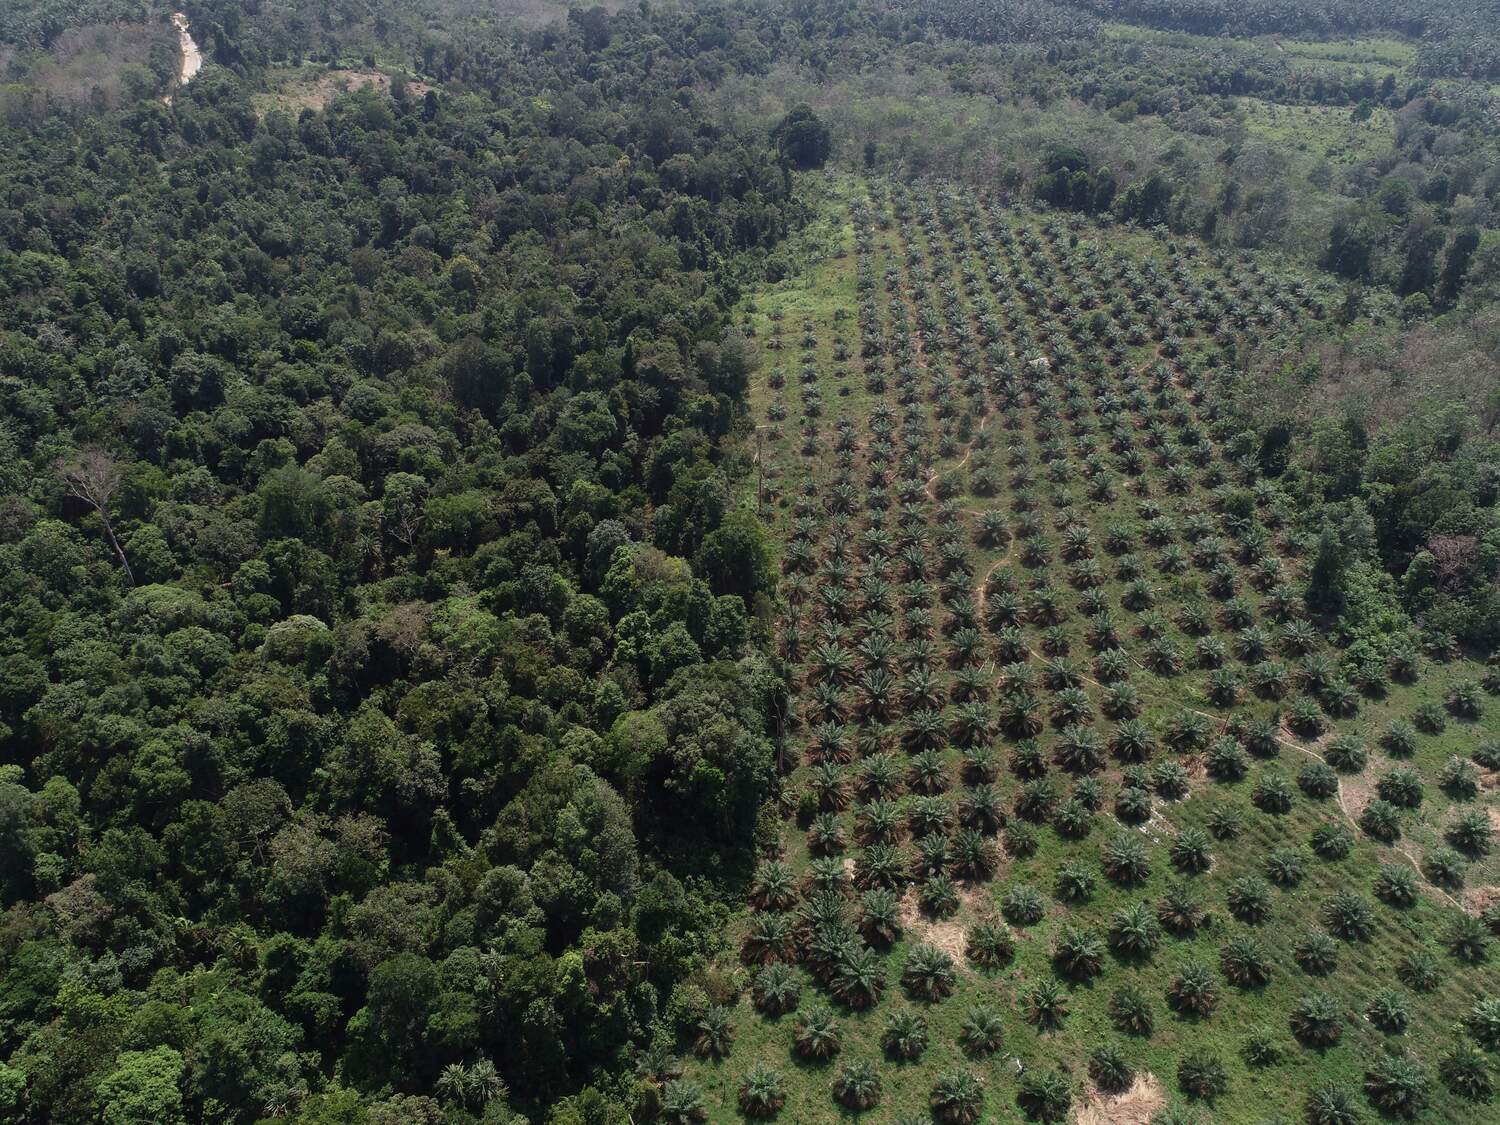 The researchers compared the effects of living roots or leaf-litter in small experimental plots in rainforest (left hand side) with oil palm plantation (right hand side)